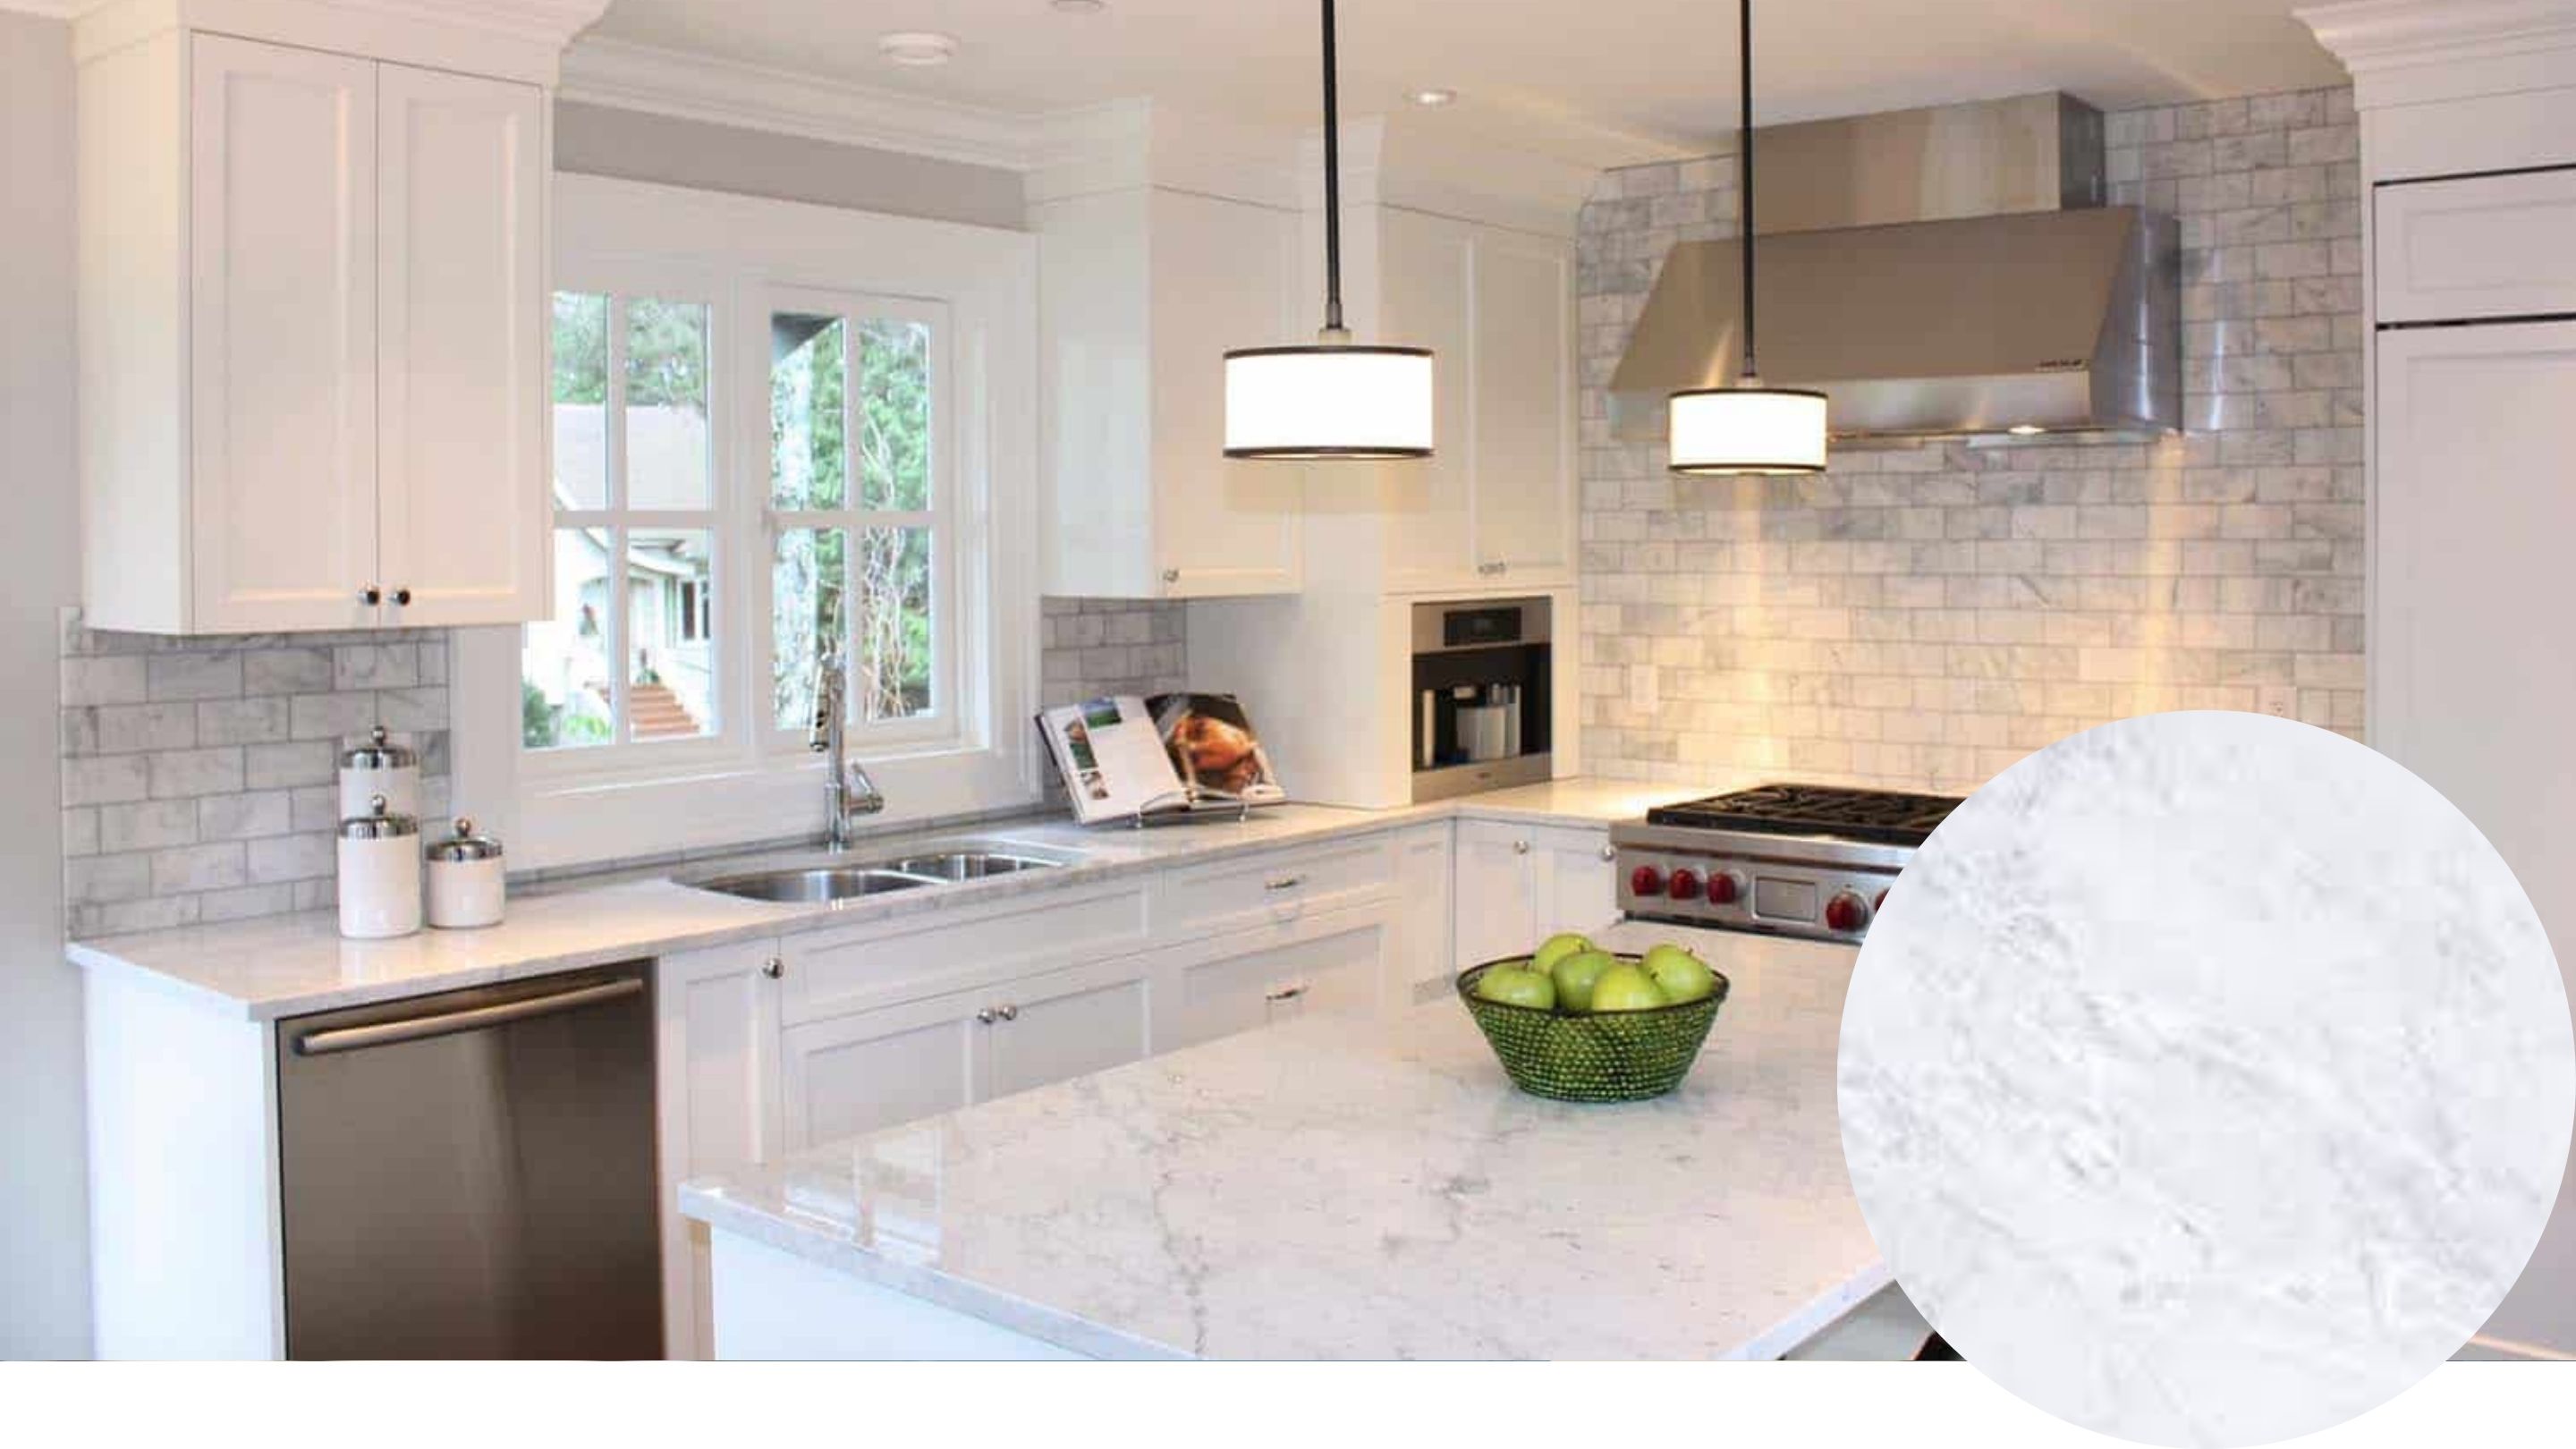 Kitchen island and marble countertops